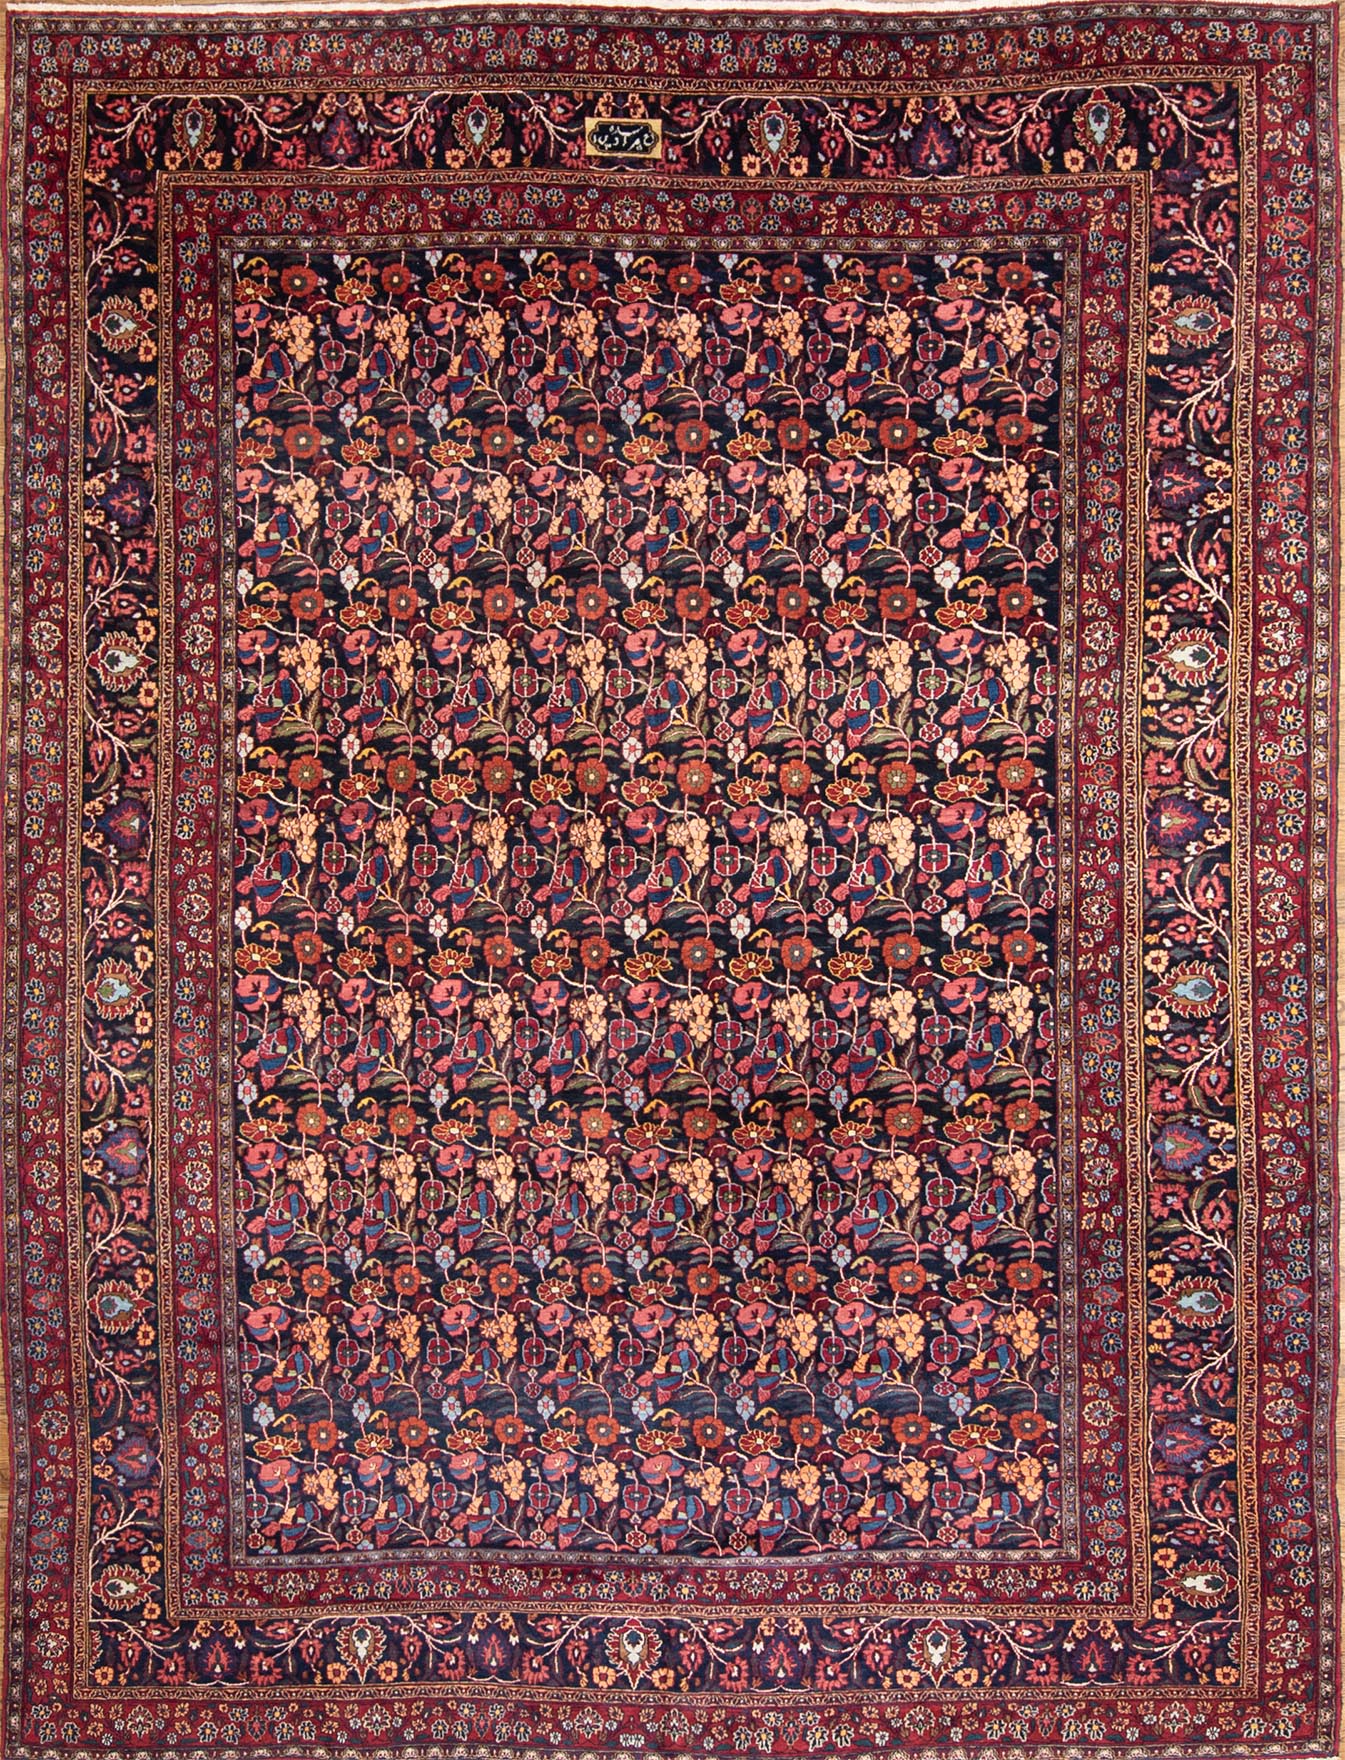 Old Persian Birjand Dorokhsh rug. Floral allover design Persian rug, multi color with navy blue background. Size 10x13.4.